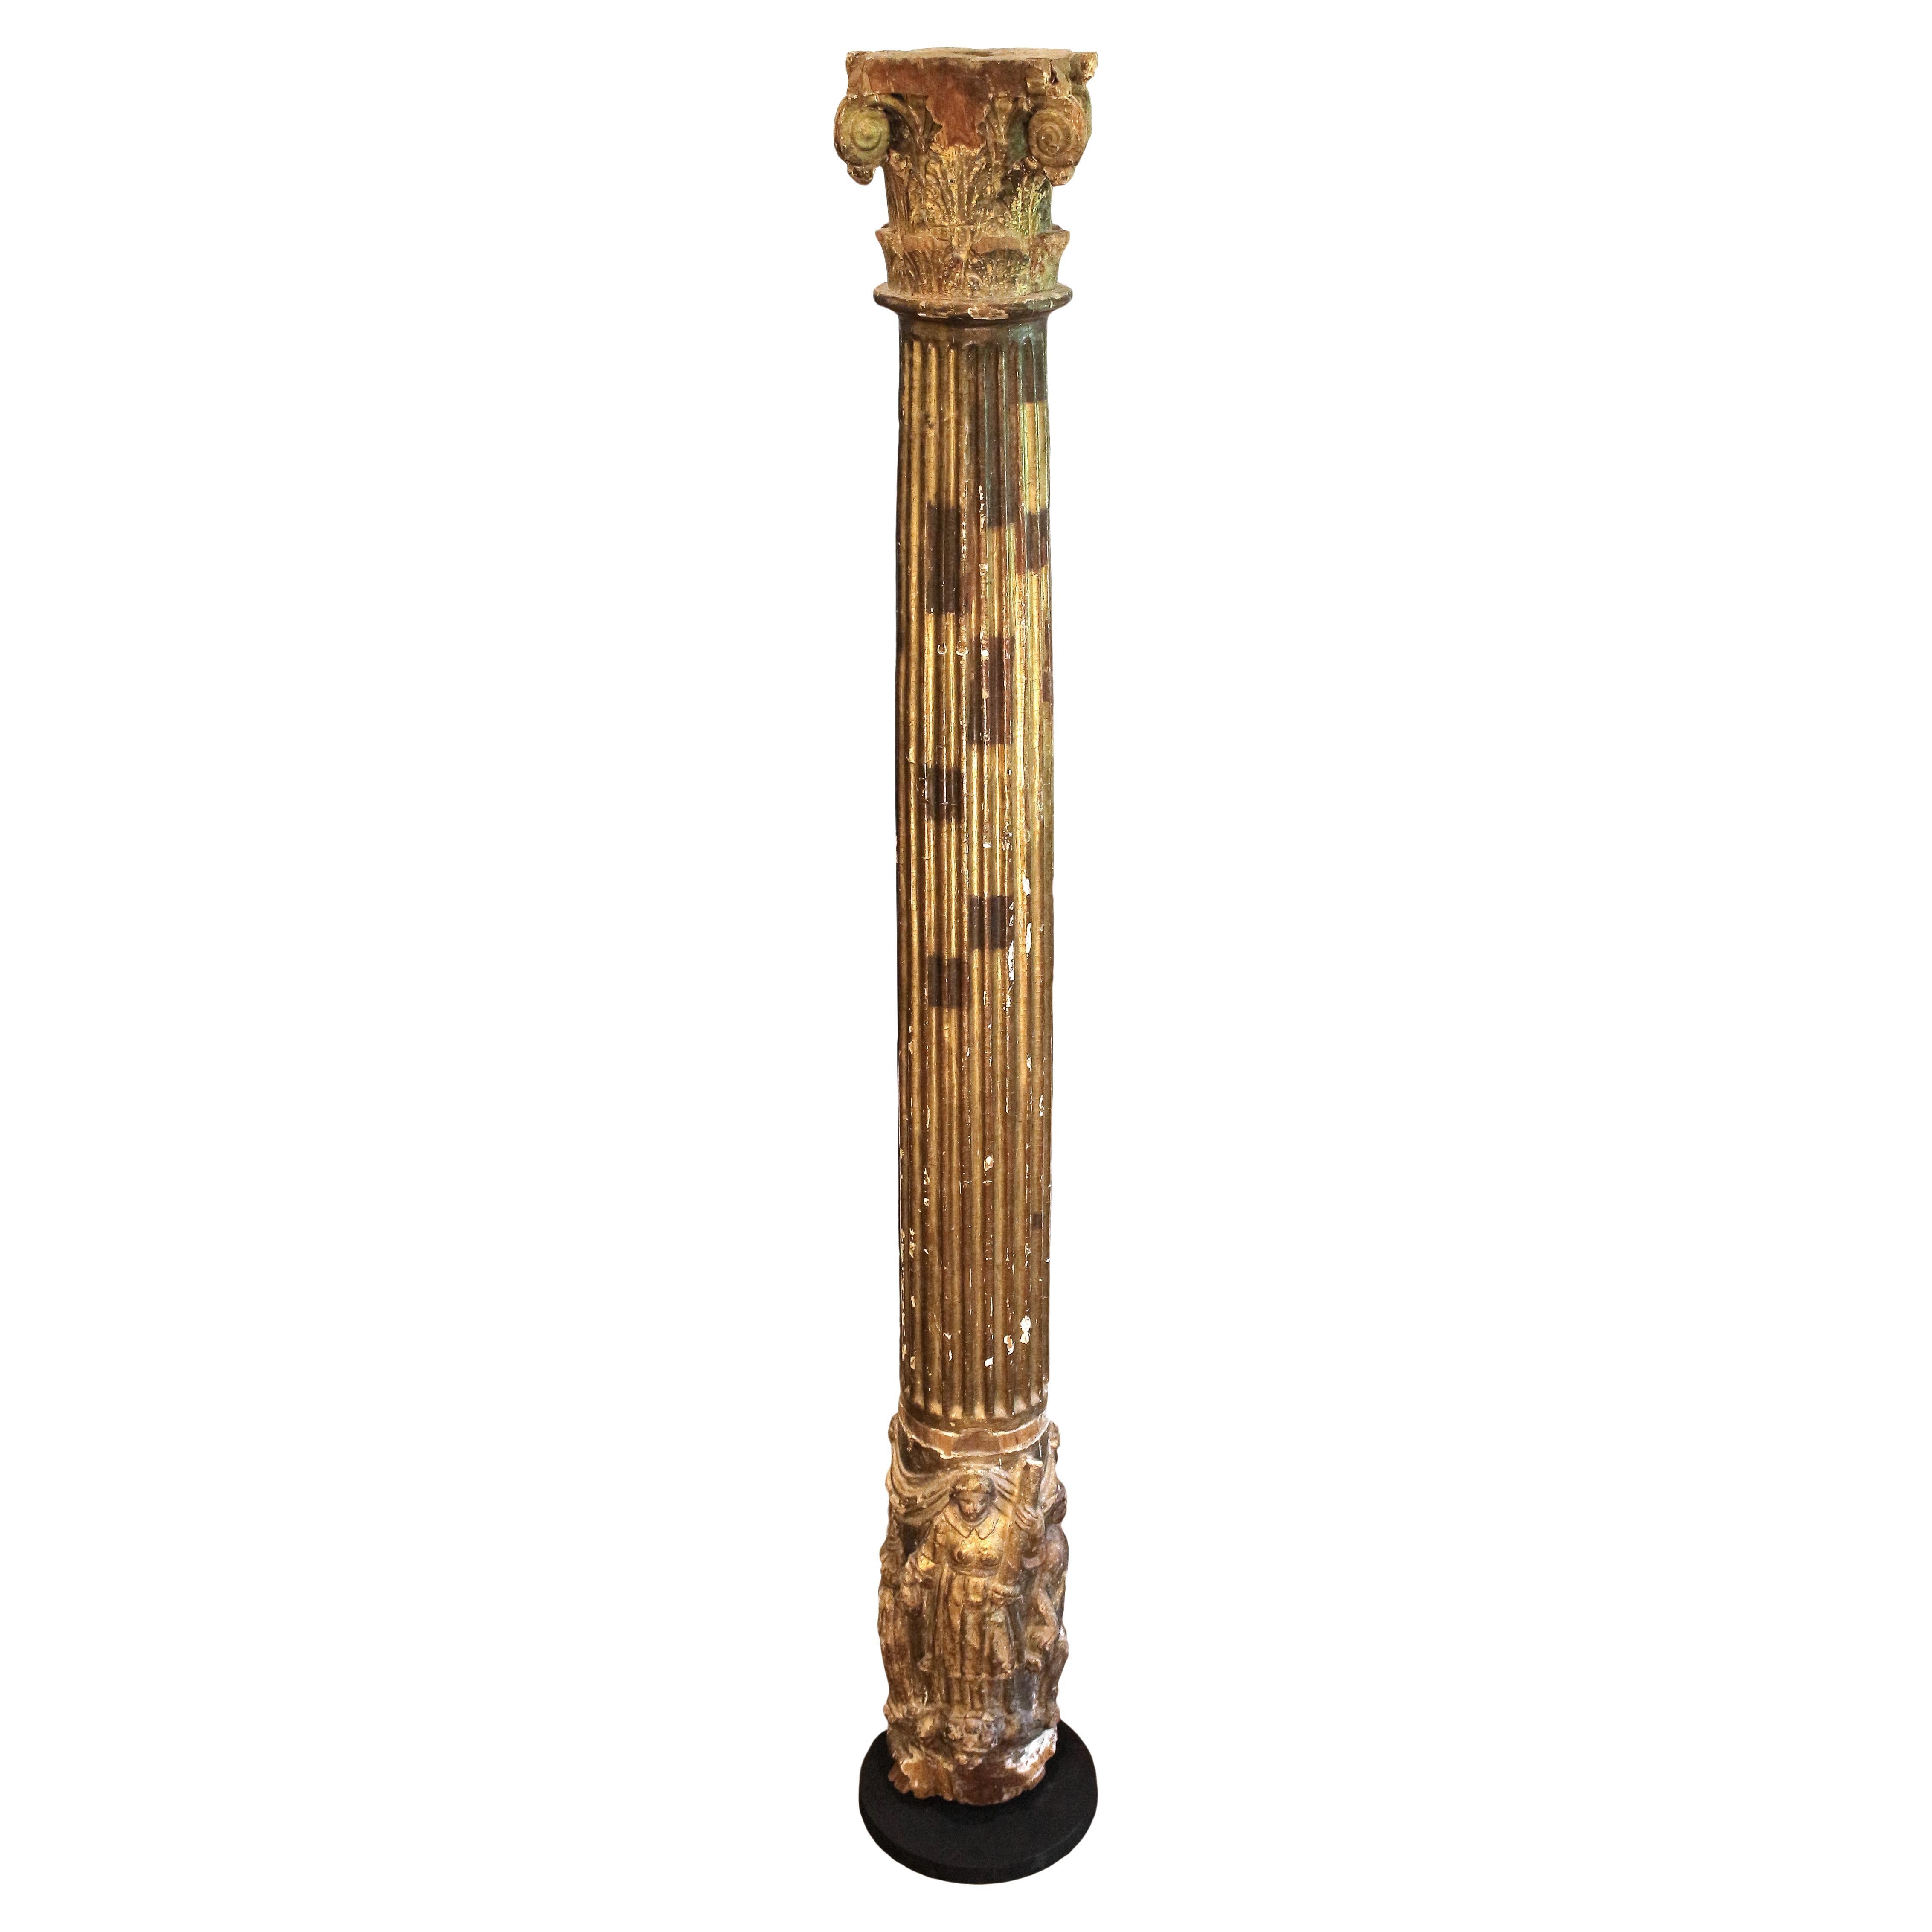 Early-Mid 18th Century Baroque Carved & Gilt Column